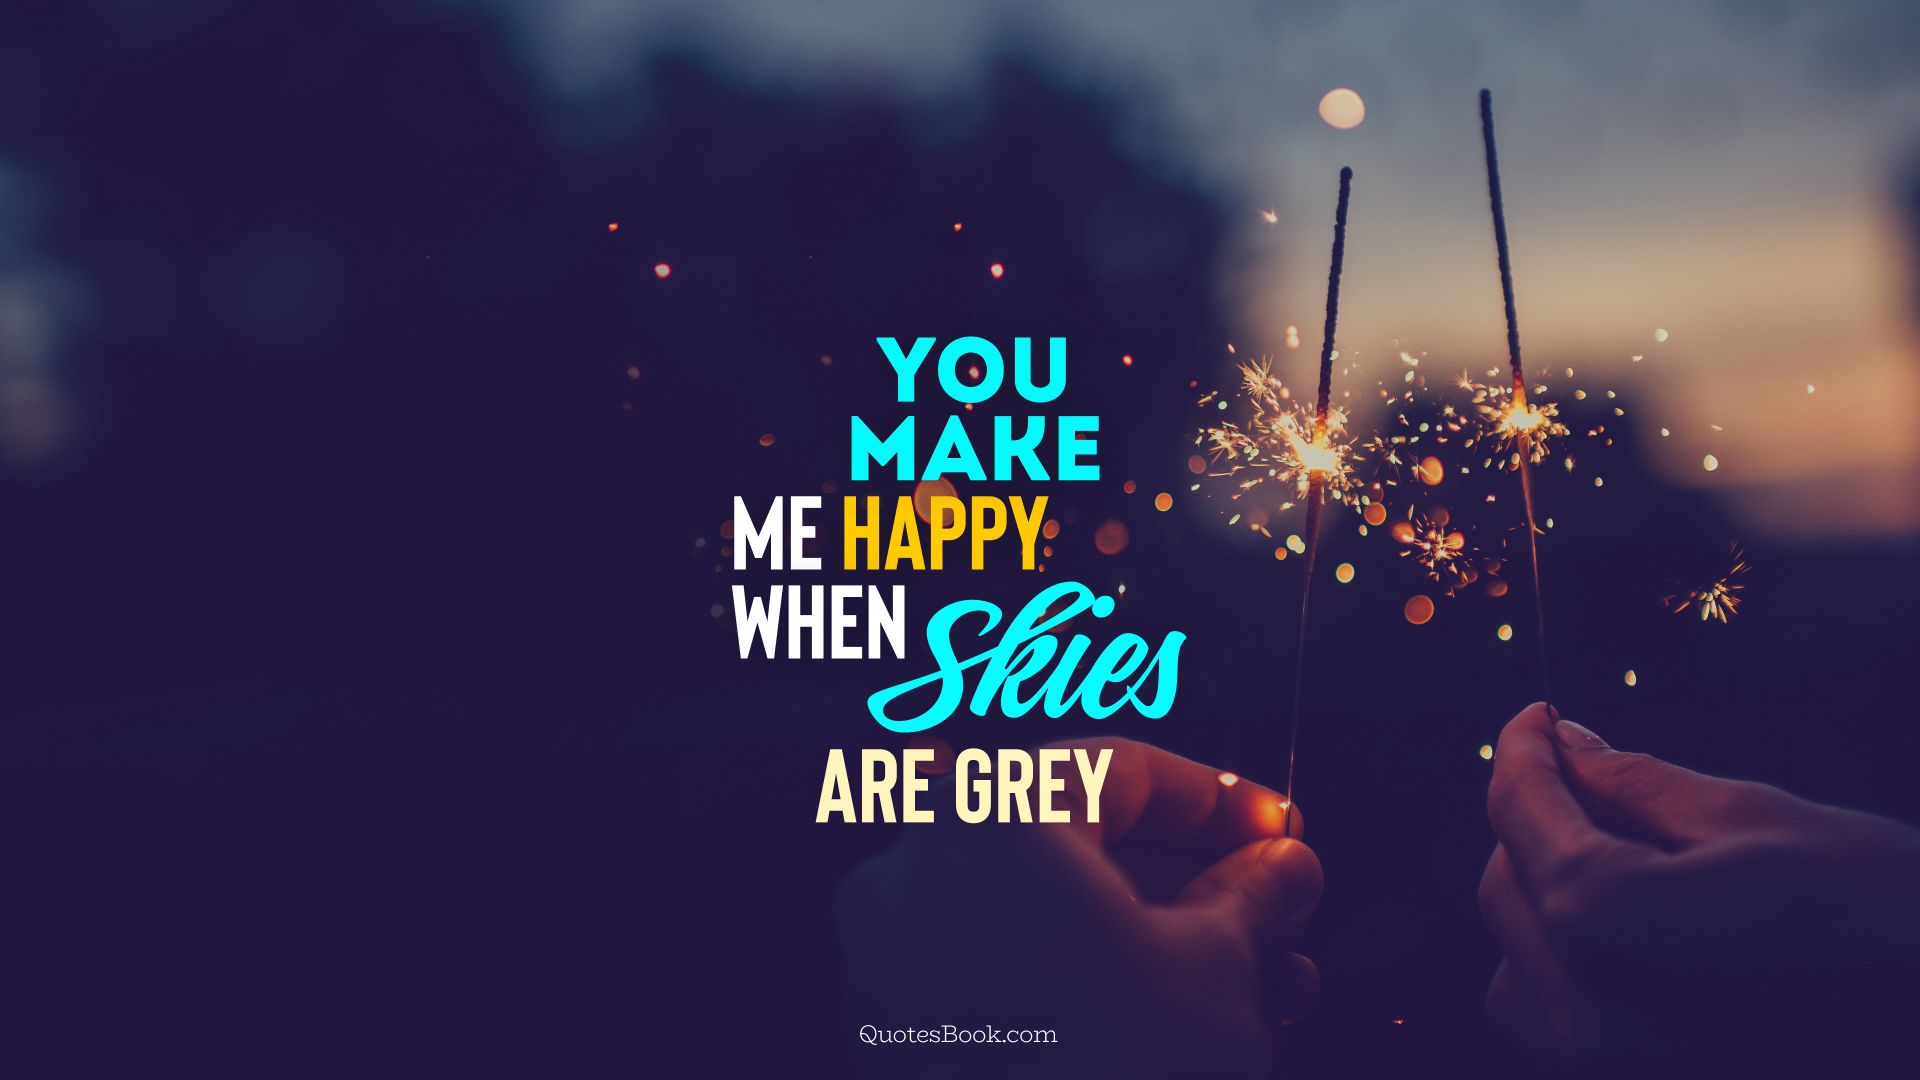 You make me happy when skies are grey